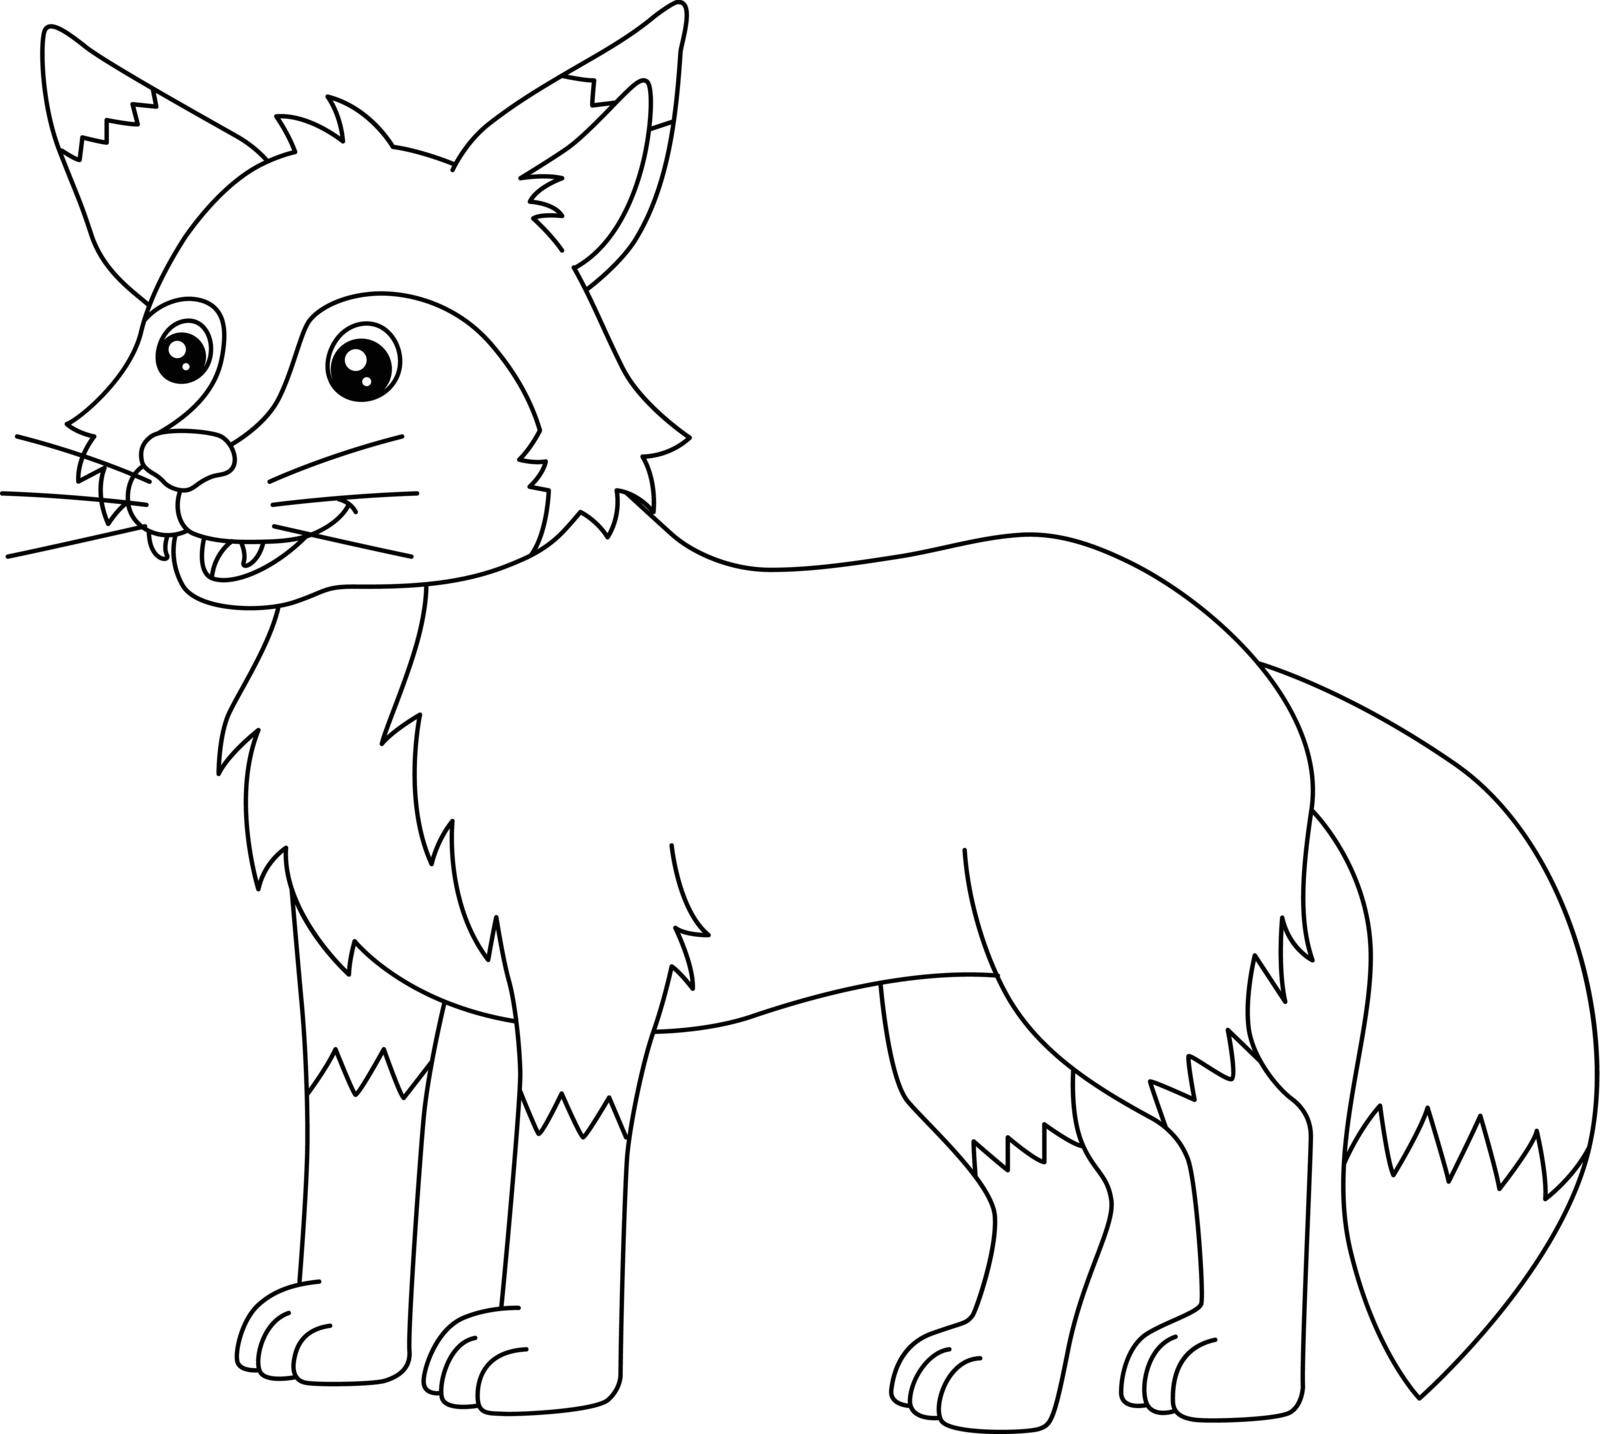 A cute and funny coloring page of a fox. Provides hours of coloring fun for children. To color, this page is very easy. Suitable for little kids and toddlers.